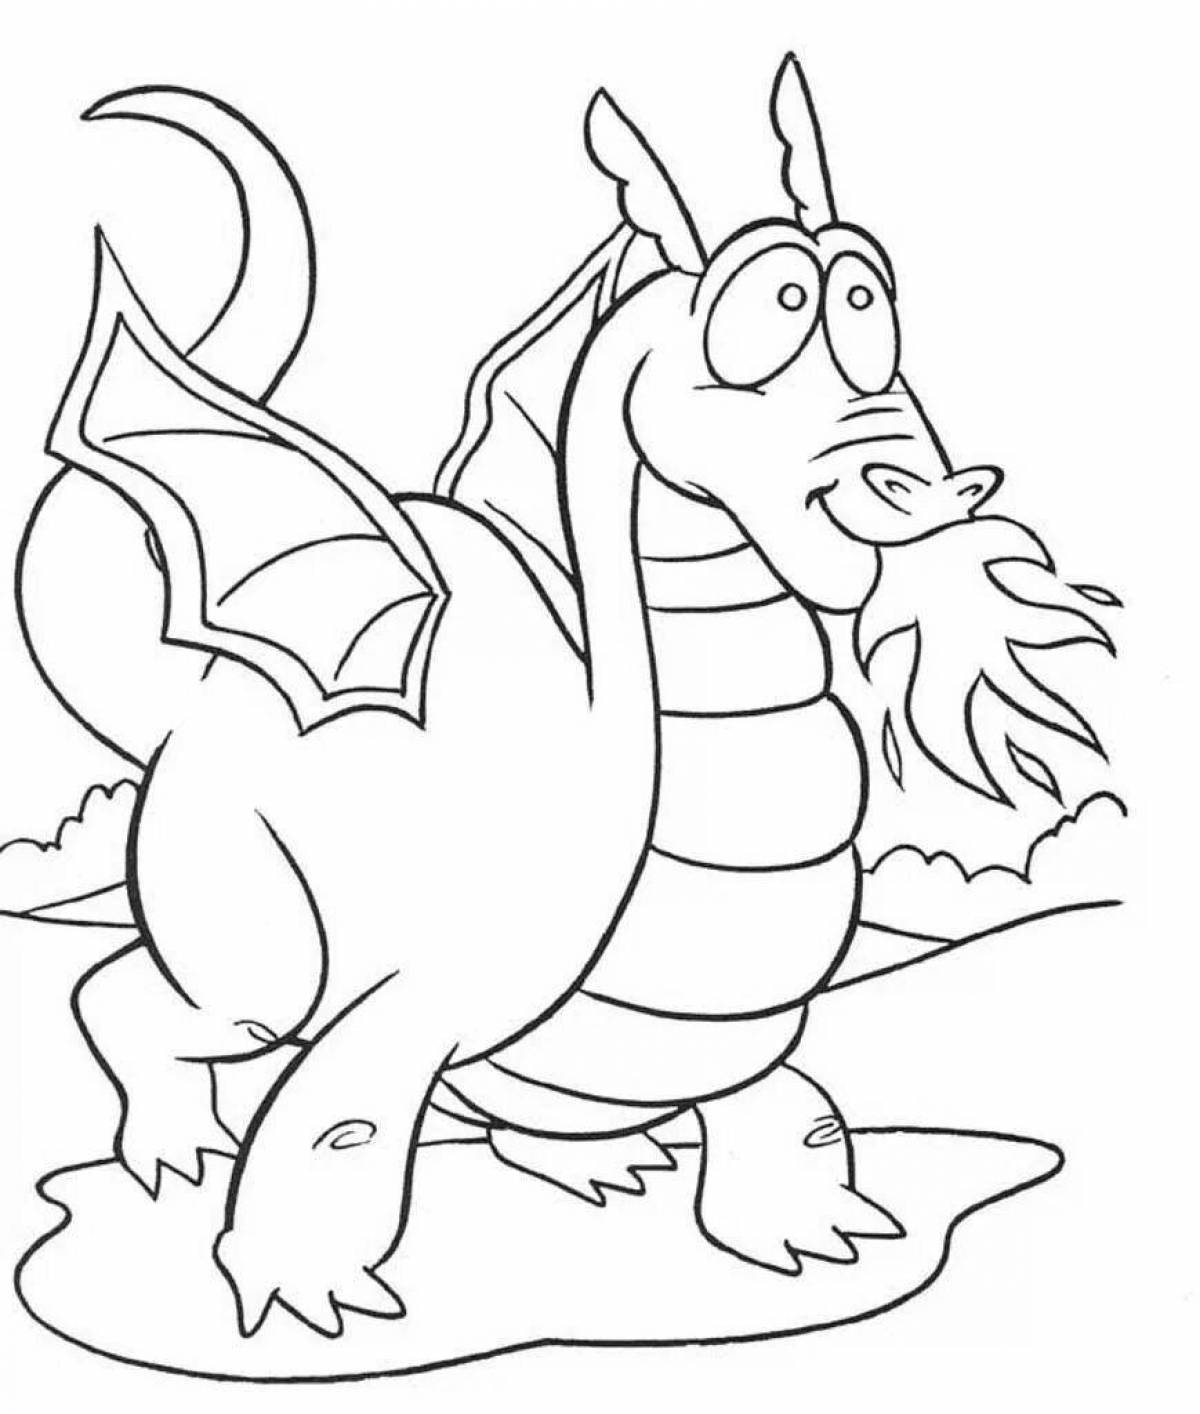 Majestic dragon coloring book for kids